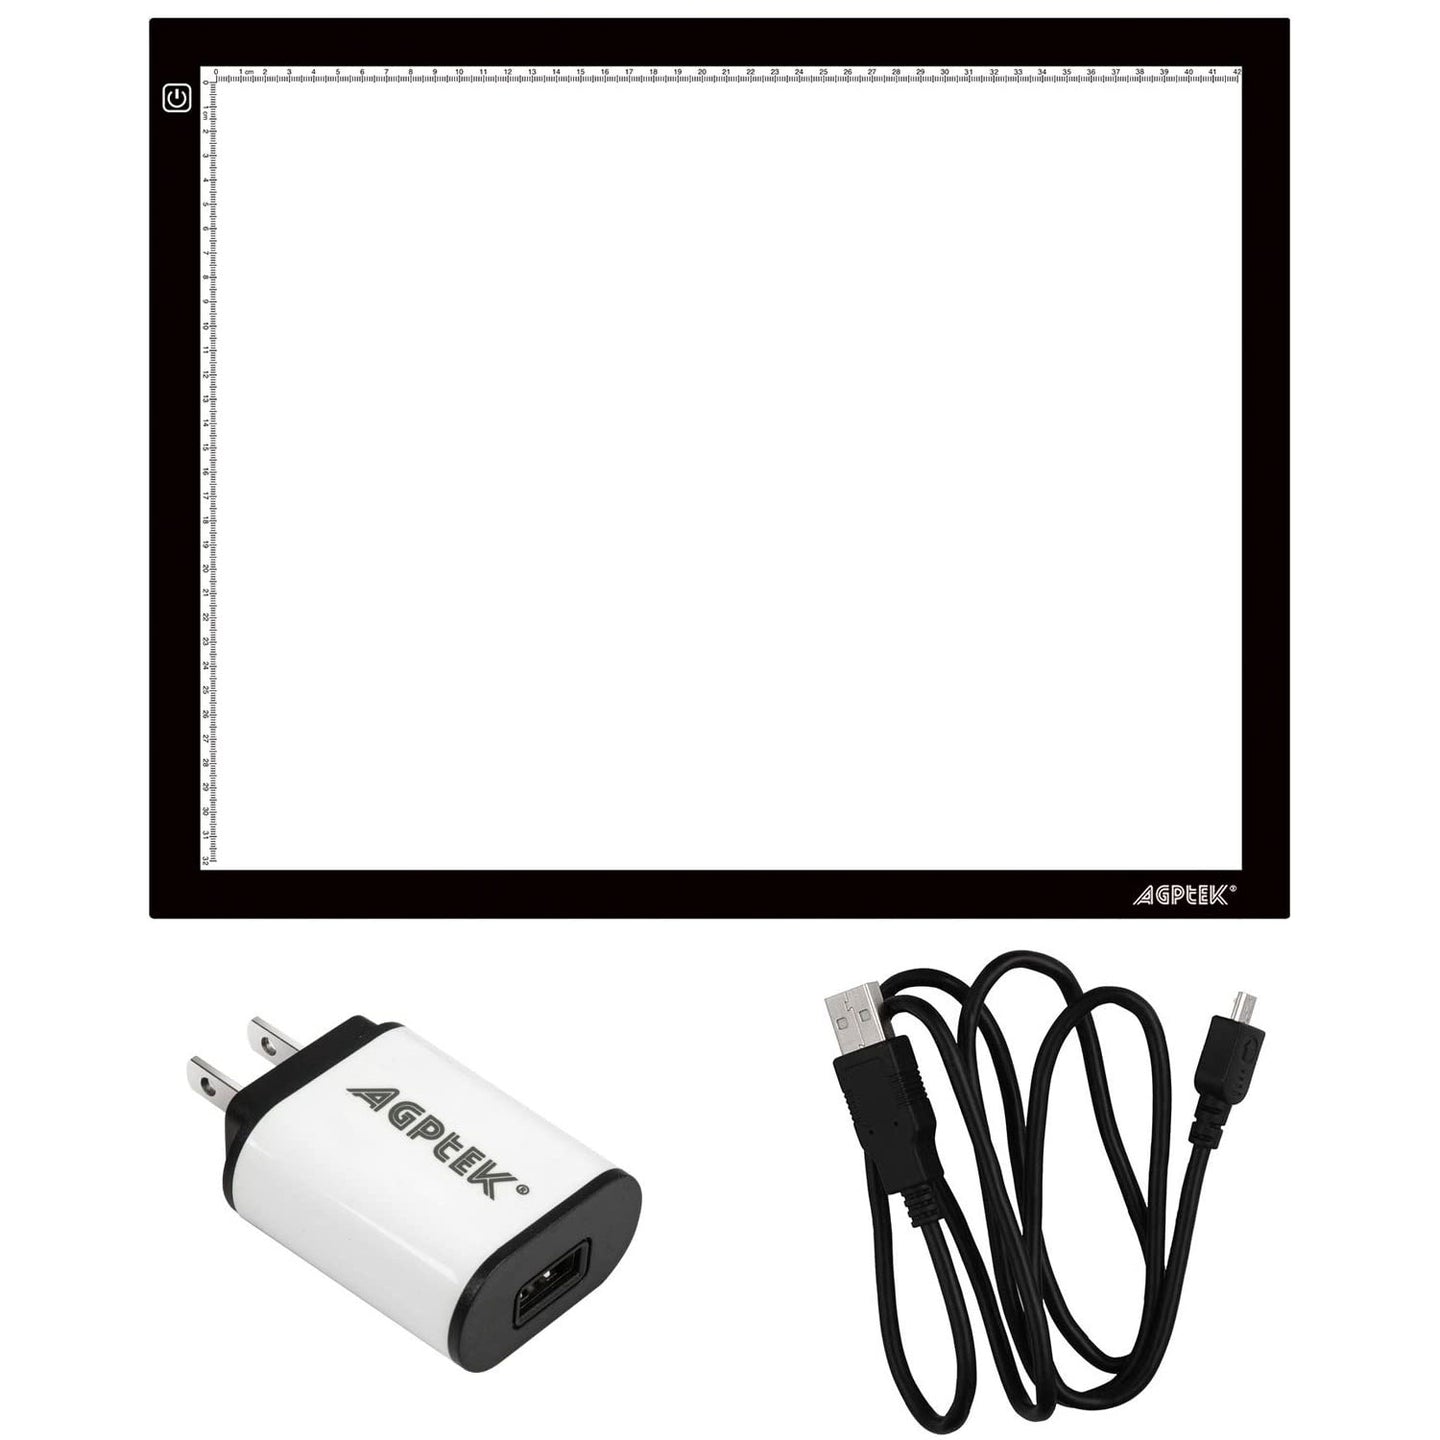 A3 light box, Light Pad Artcraft Tracing Light Board Ultra-thin USB Powered Dimmable LED Brightness for Diamond Painting Tatoo Pad Animation Sketching Designing Stencilling X-ray Viewing